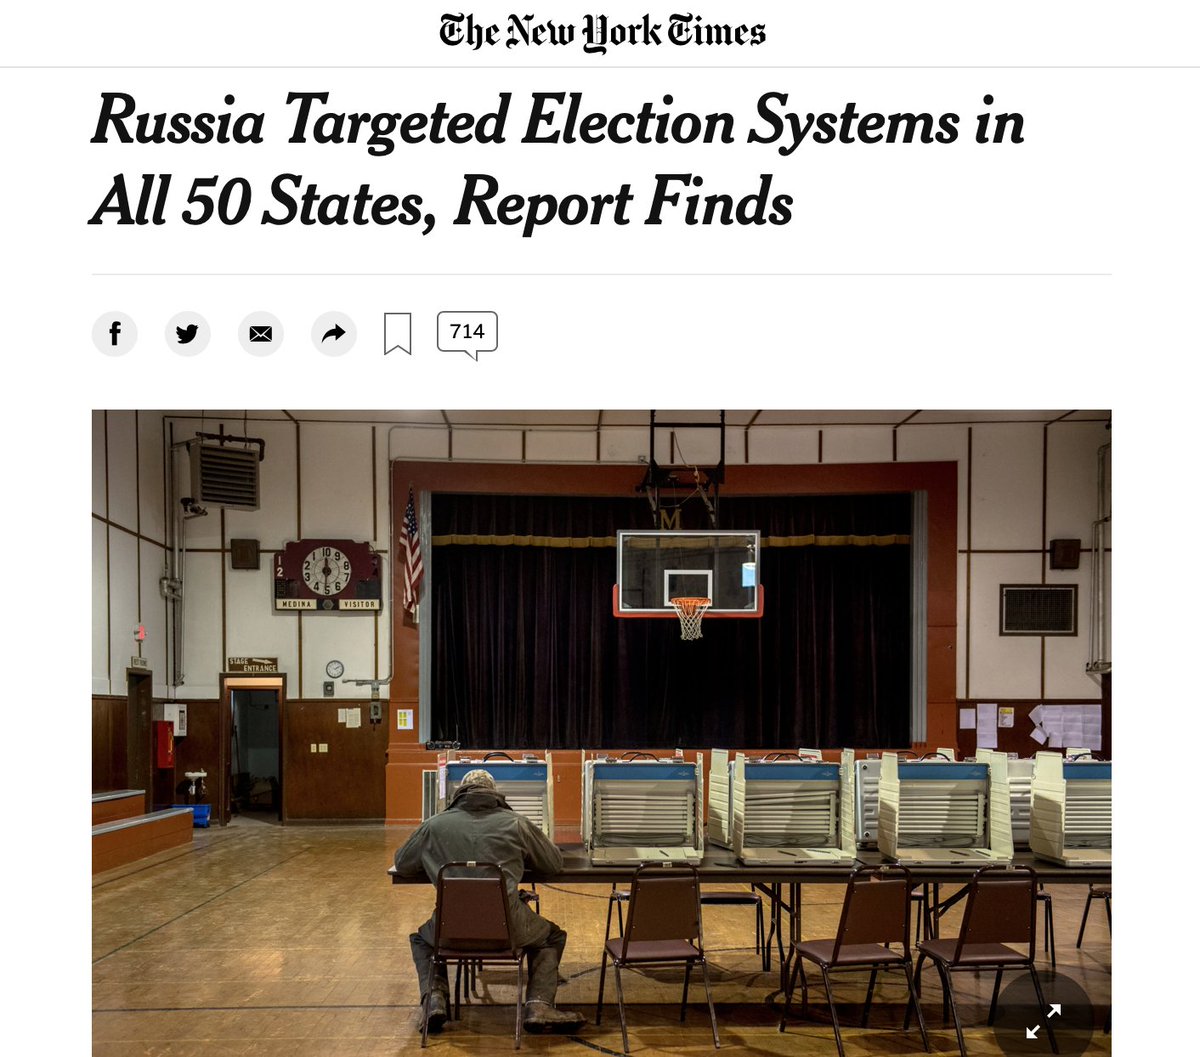 But how would they add voters to voting rolls? You'd need an opportunity.Coincidentally we know...THE SENATE INTELLIGENCE COMMITTEE CONCLUDED ELECTION SYSTEMS IN ALL 50 STATES WERE TARGETED BY RUSSIARussia wouldn't do it for shits & giggles. Could they have added names?